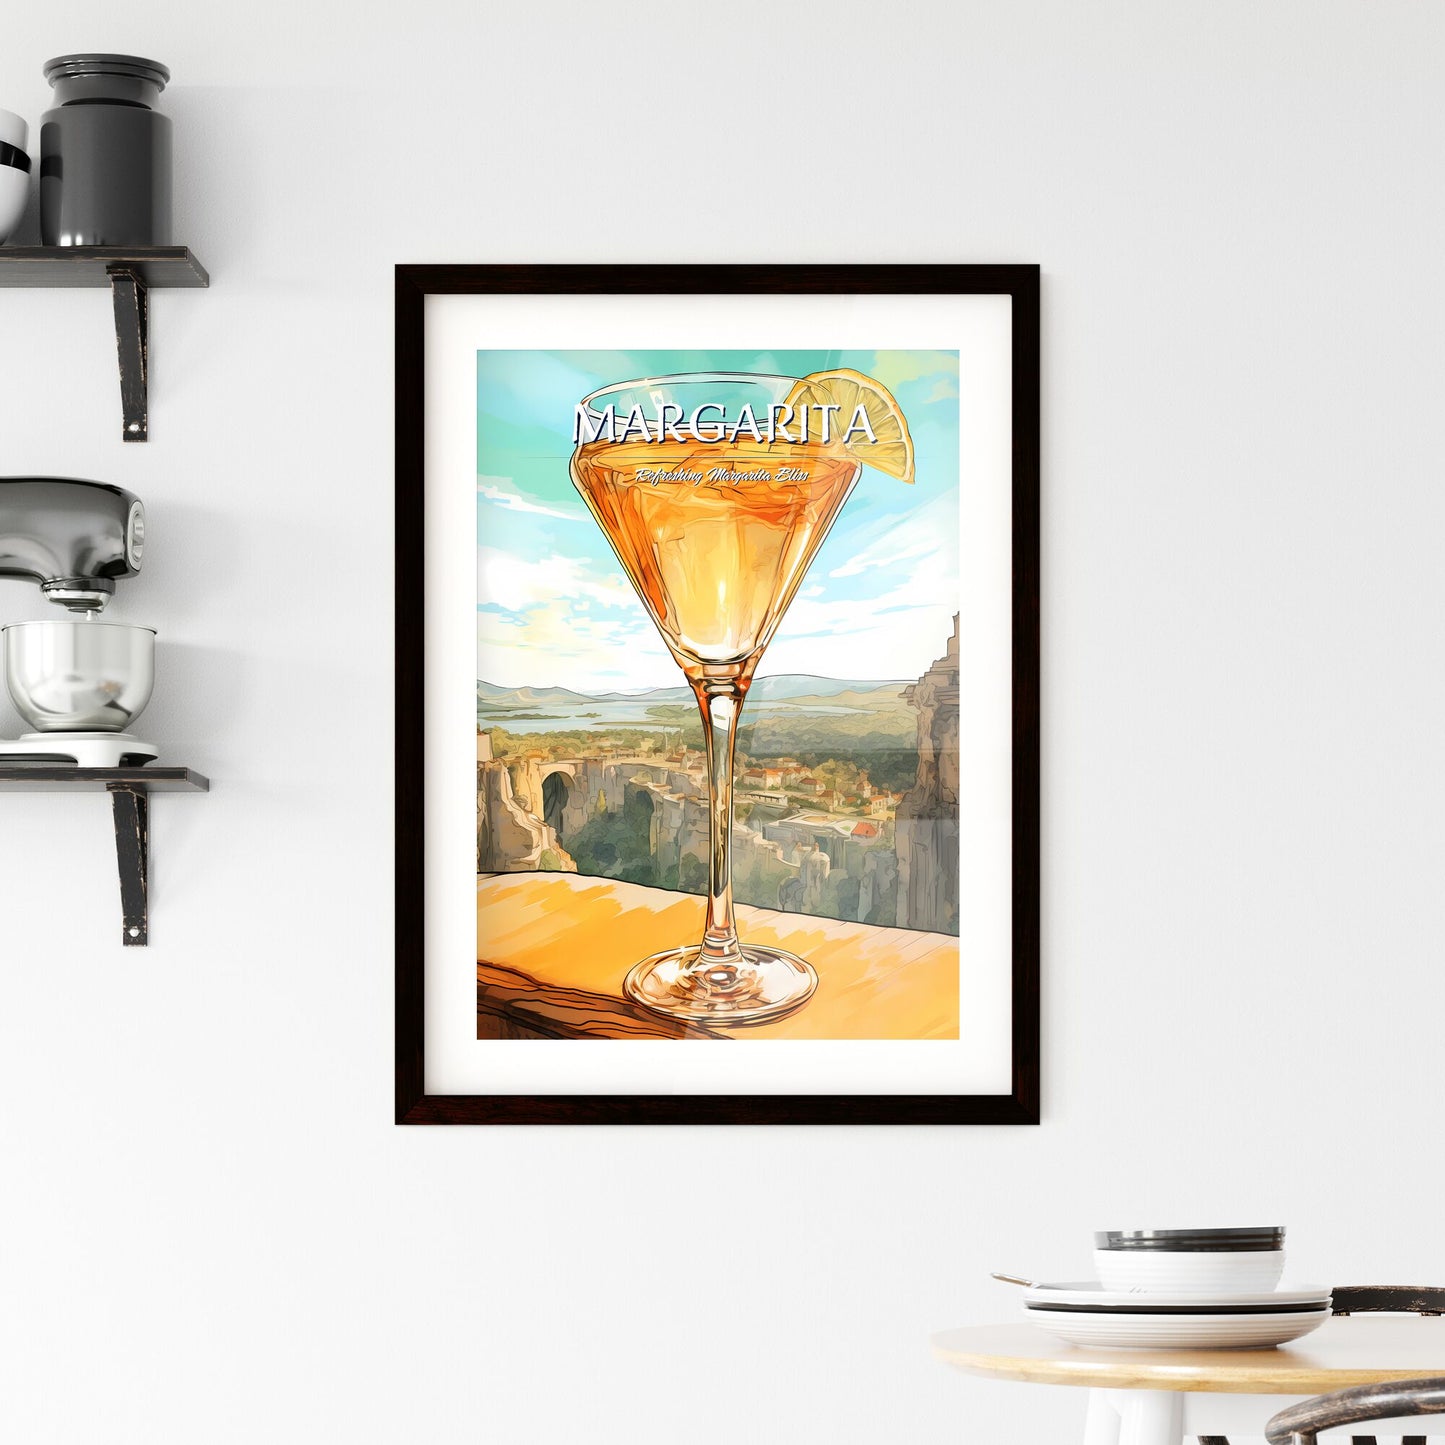 A Poster of Margarita Glass with classic margarita cocktail - A Glass Of Liquid With A Slice Of Lime And A City In The Background Default Title